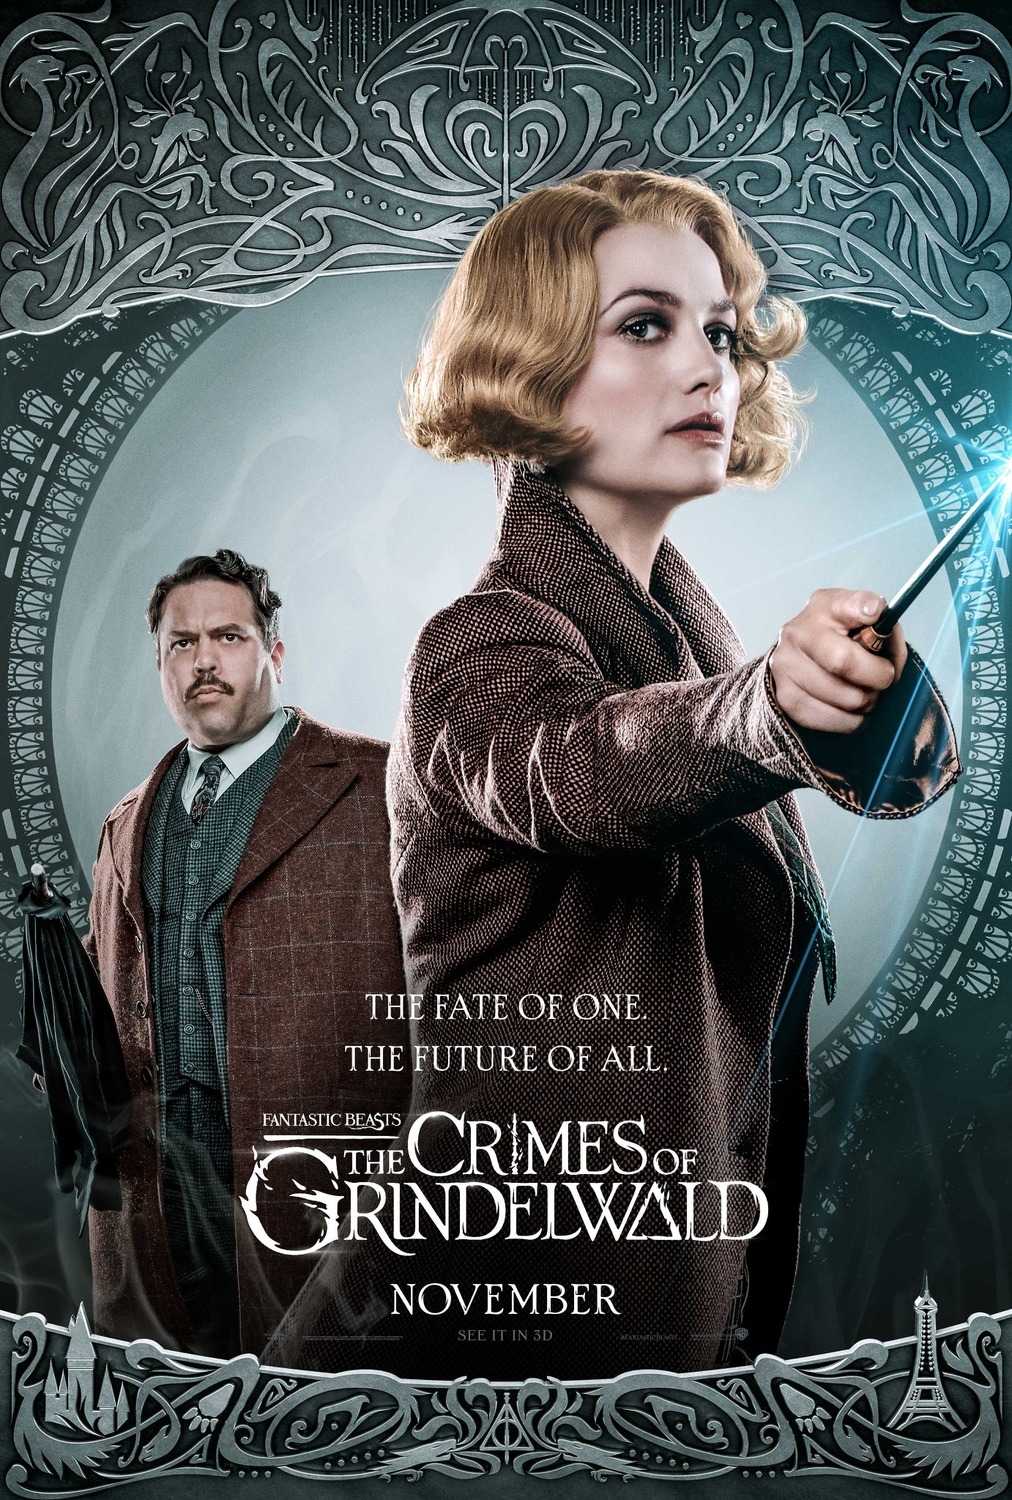 Extra Large Movie Poster Image for Fantastic Beasts: The Crimes of Grindelwald (#17 of 32)